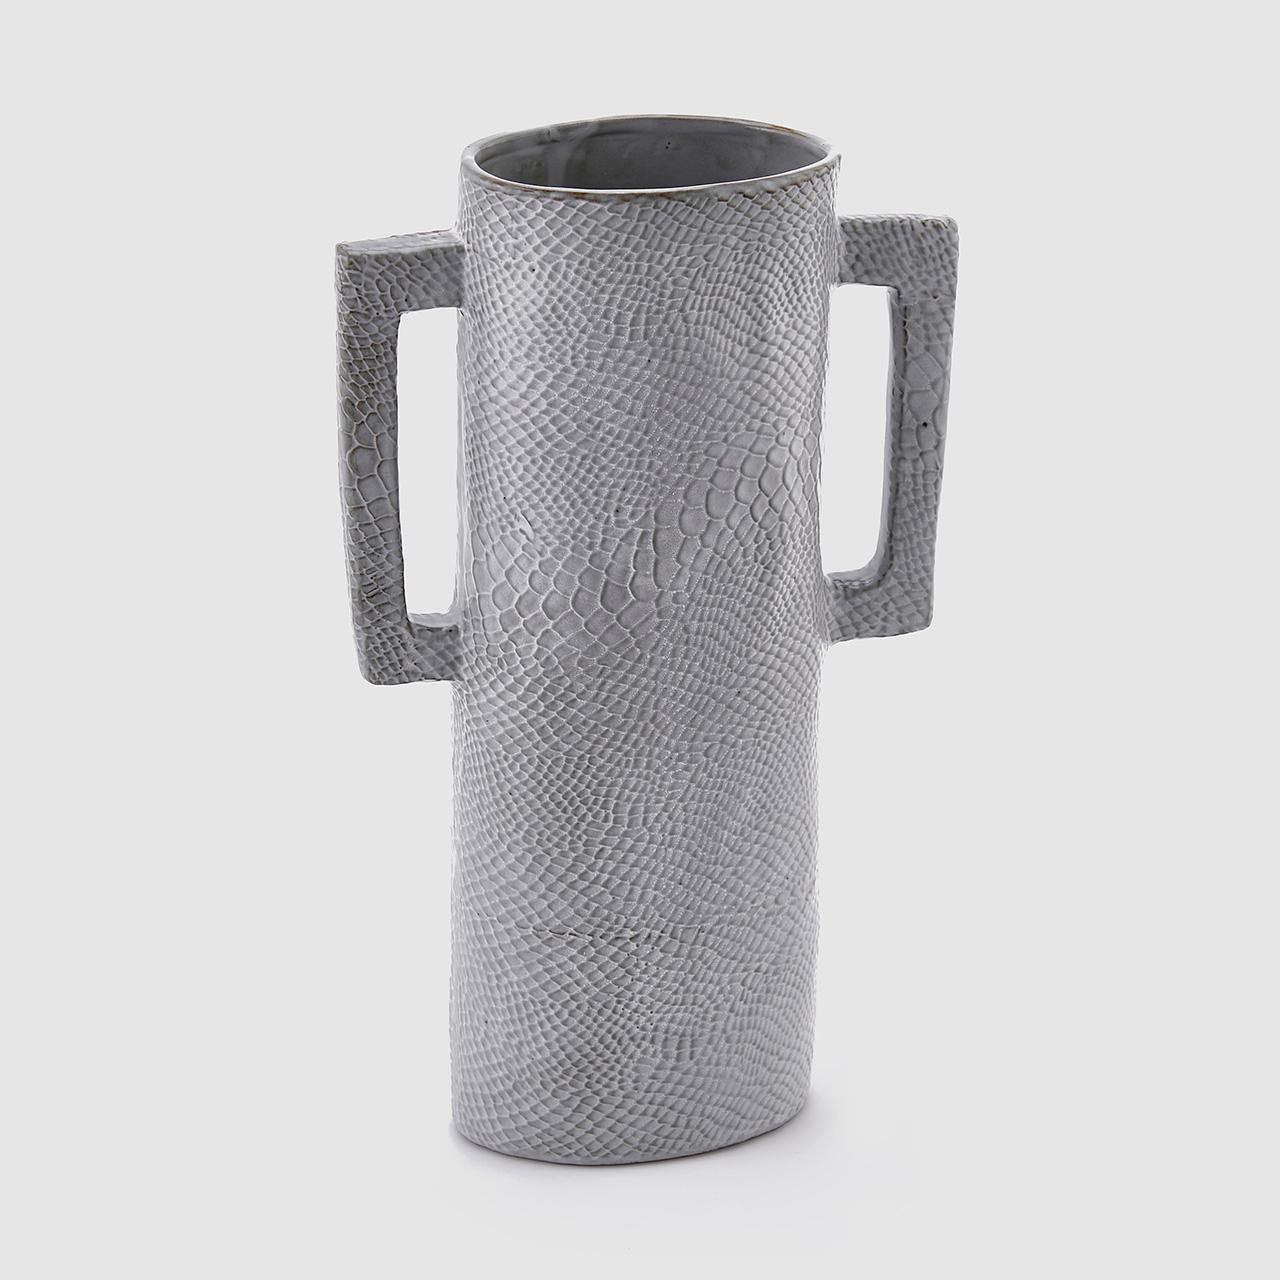 Grey Skin Ceramic Vase with Side Handles - THEHOUSEFUL